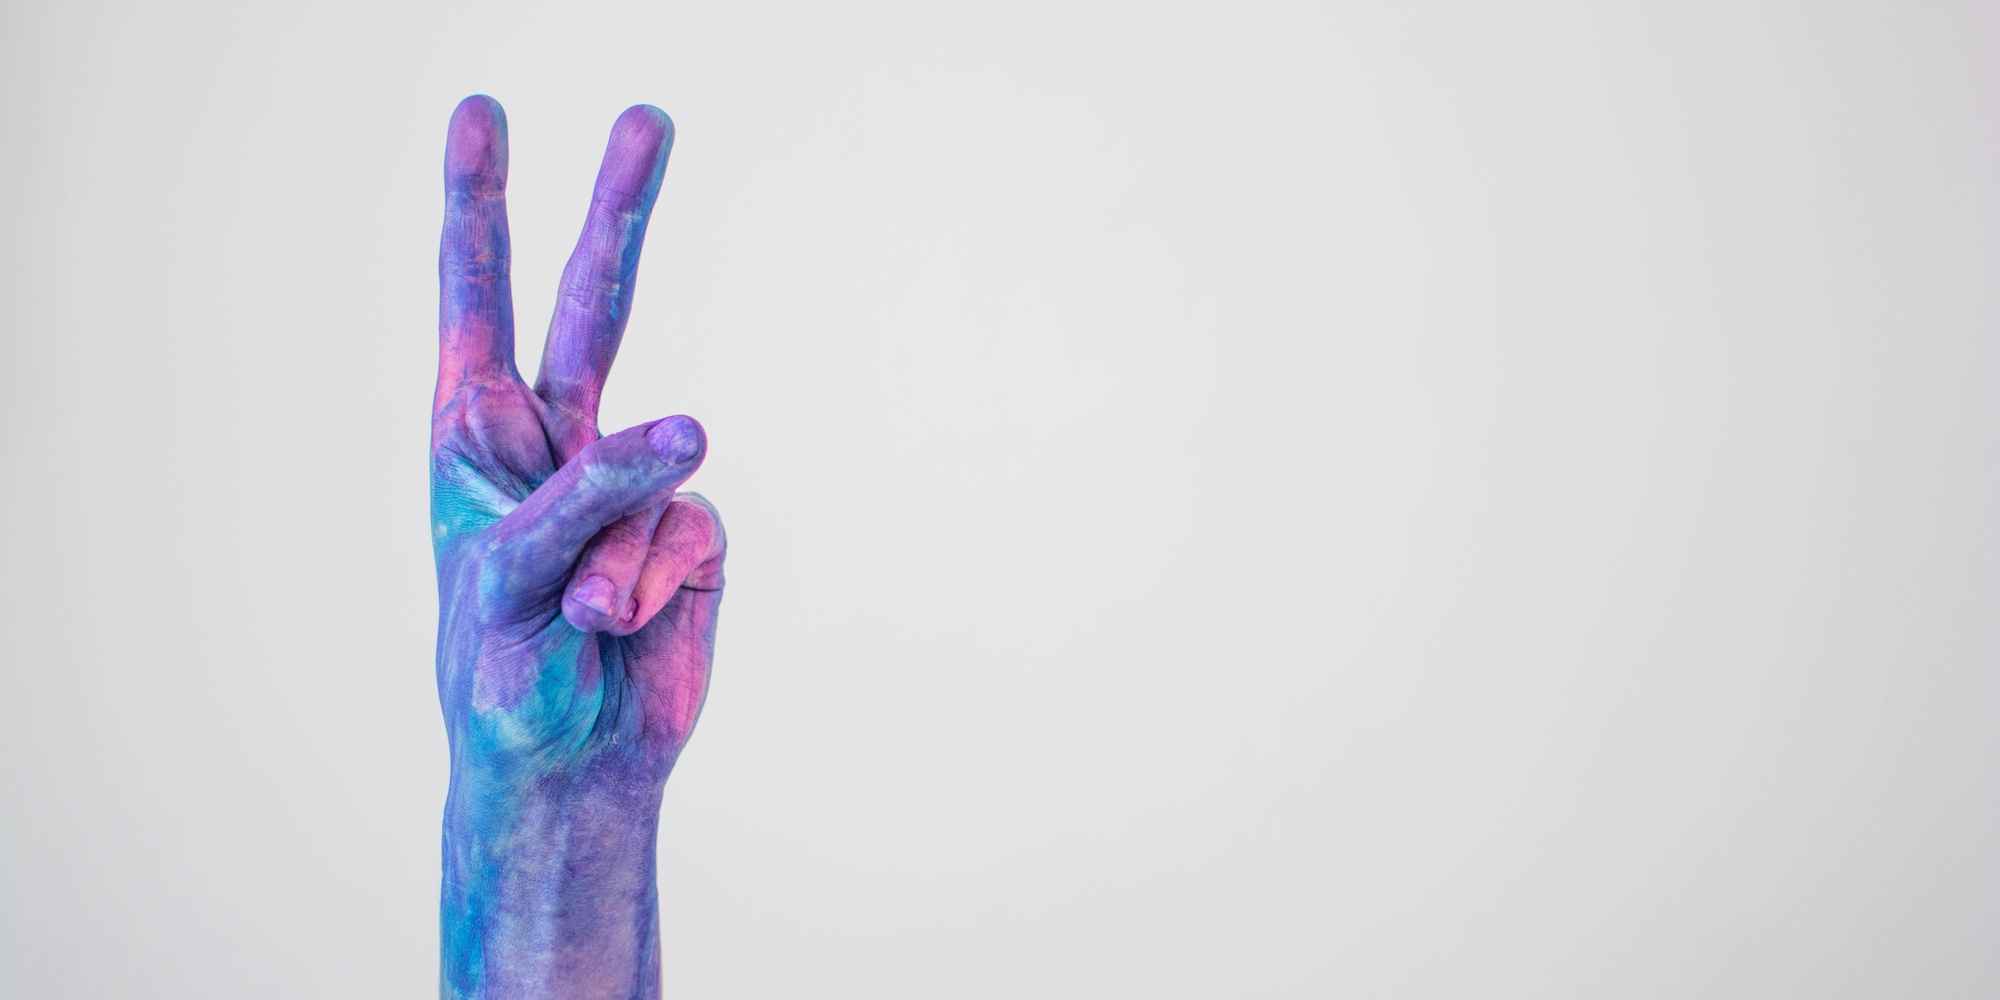 Blue Pink Colored Painted Hand Gesturing Peace Sign